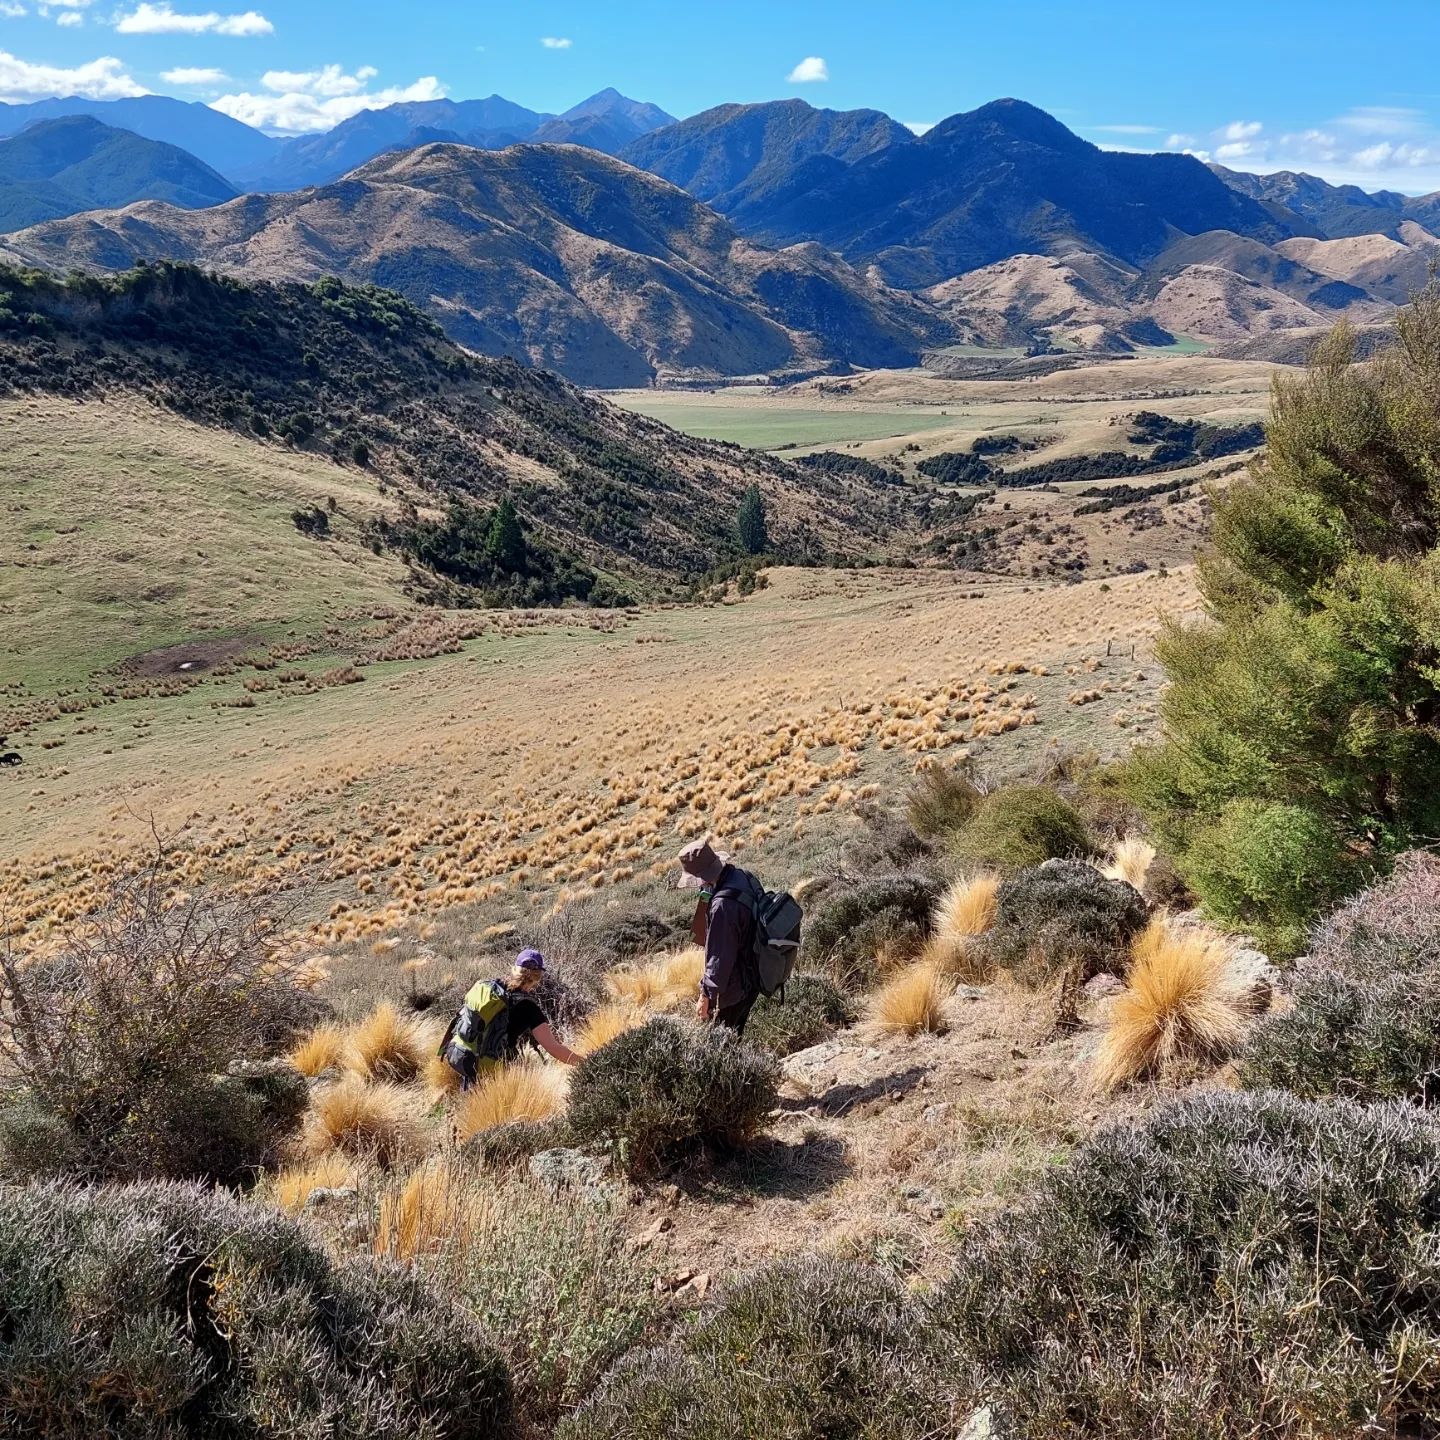 I just got back from an amazing 6 day field trip into the hills near Culverden for Geo240. We mapped the area, made cross sections, found faults, found mice, and hit many, many rocks with our shiny new rockhammers. I learned so much in such a short time and met some really great people.        